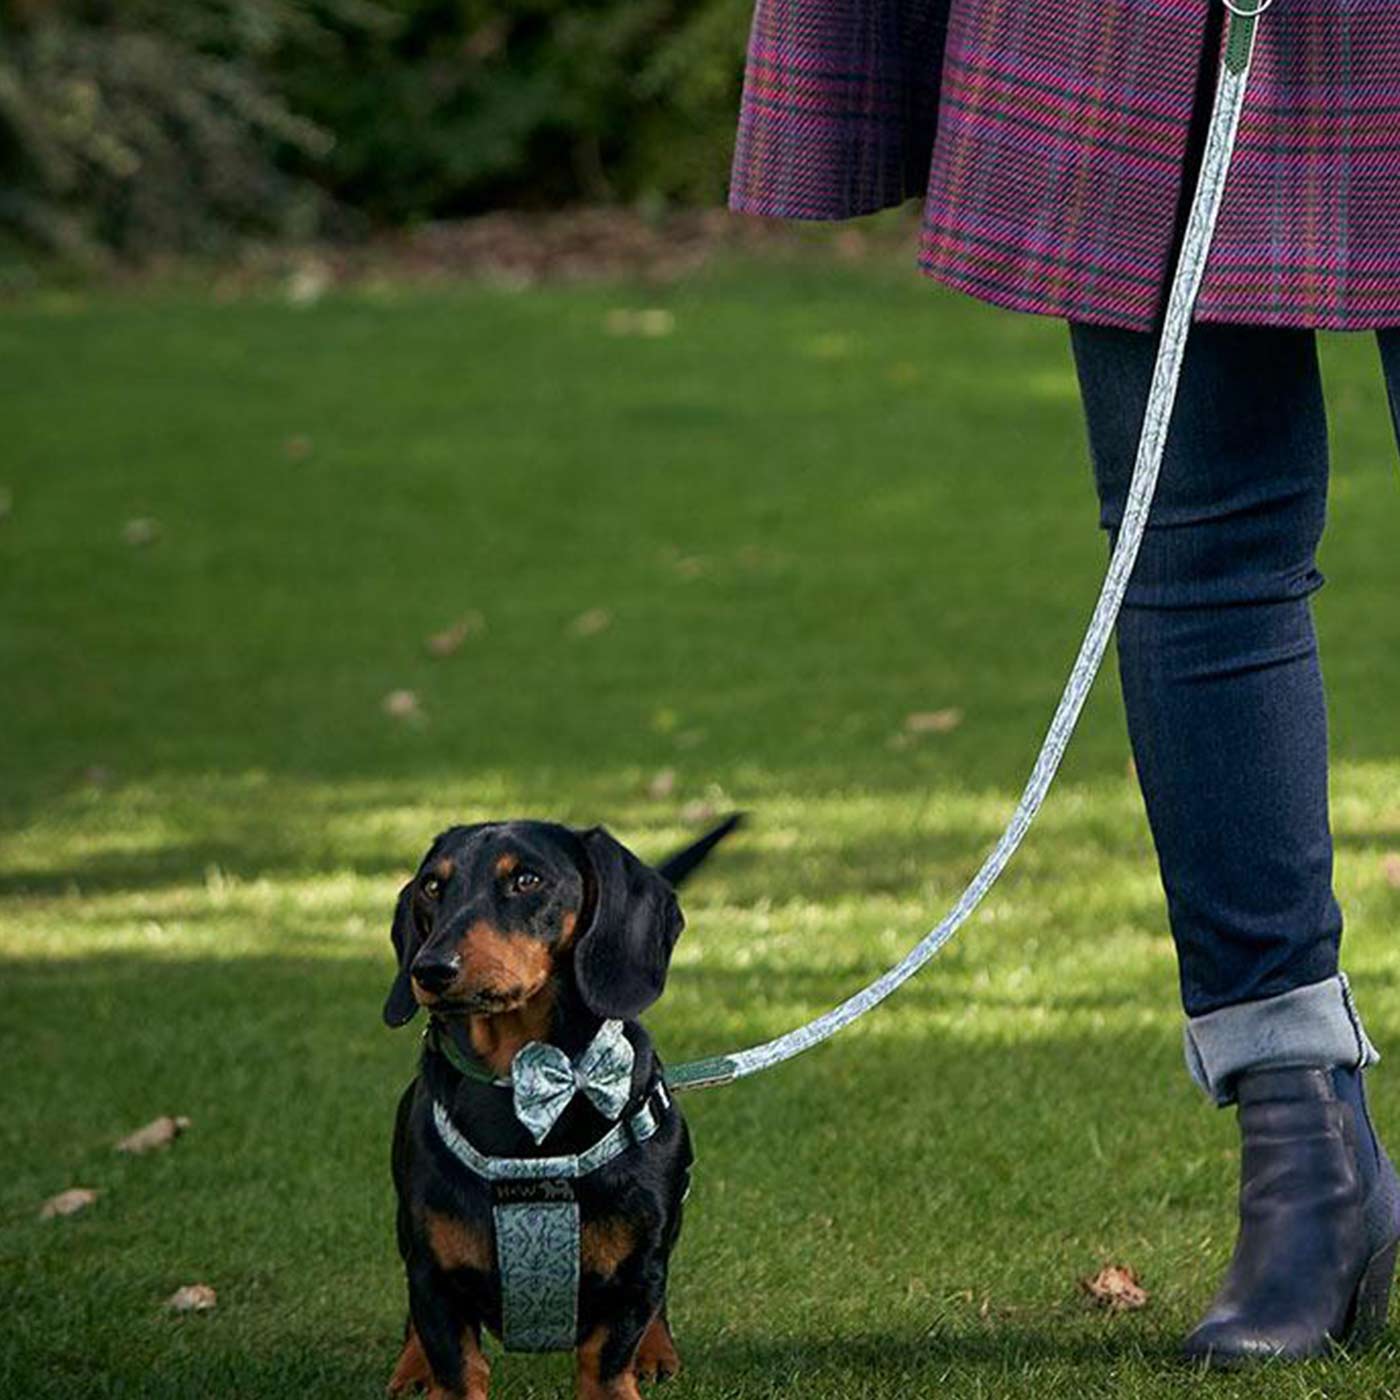 [colour:stag] Set & accessorise your pooch ready for a stylish dog walk with Hiro + Wolf X L&L Dog Lead, the perfect dog walking accessory! Made using strong webbing lining to provide extra strength! Available in 3 stylish designs and one sizes at Lords & Labradors